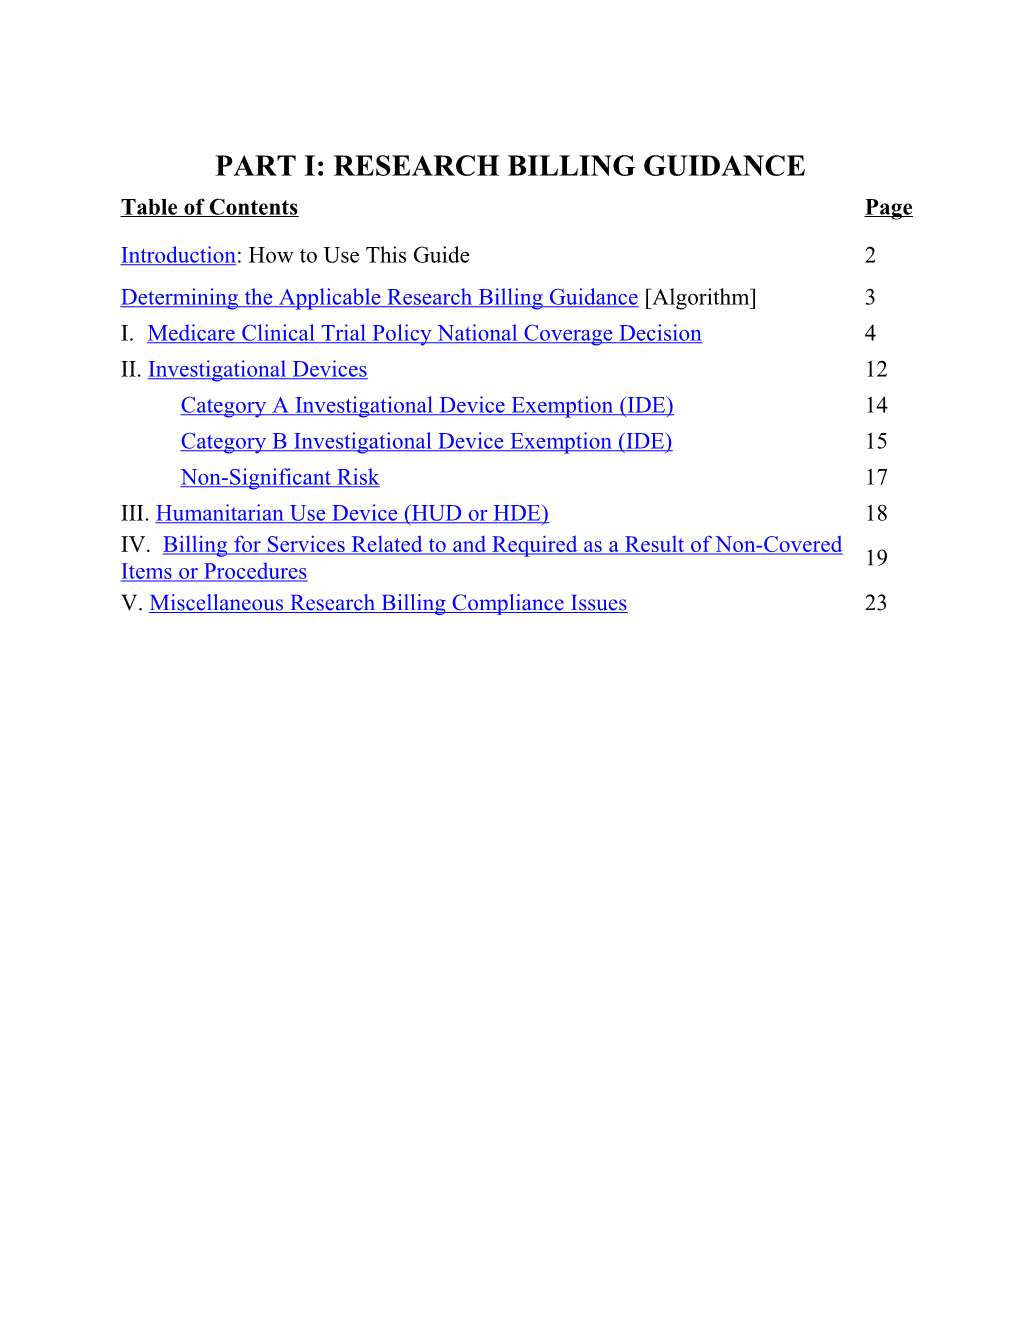 Part I: Research Billing Guidance